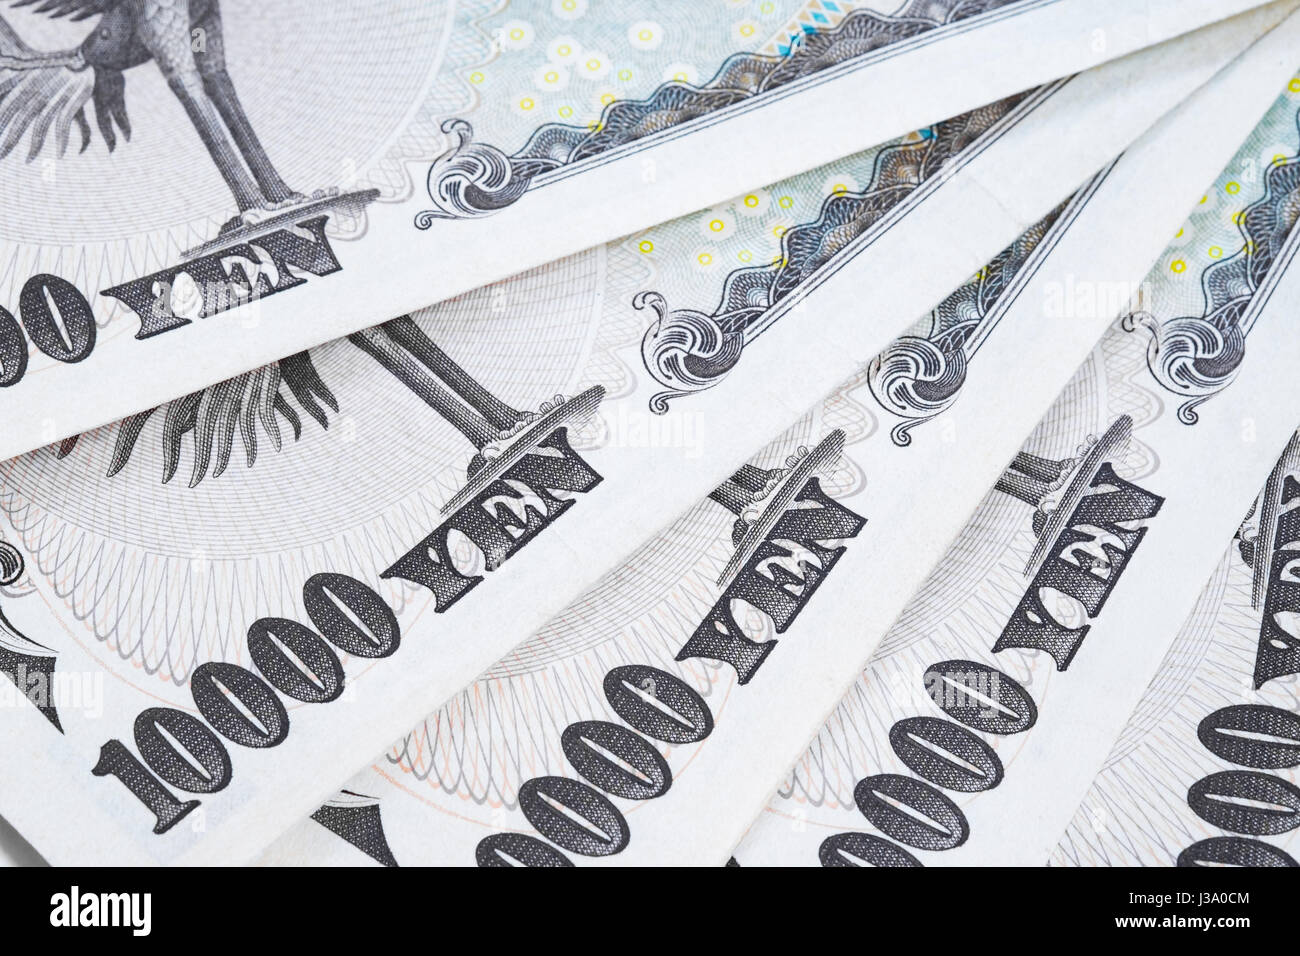 Japanese 10000 yen notes. Imperial Japanese Paper Currency background. Stock Photo